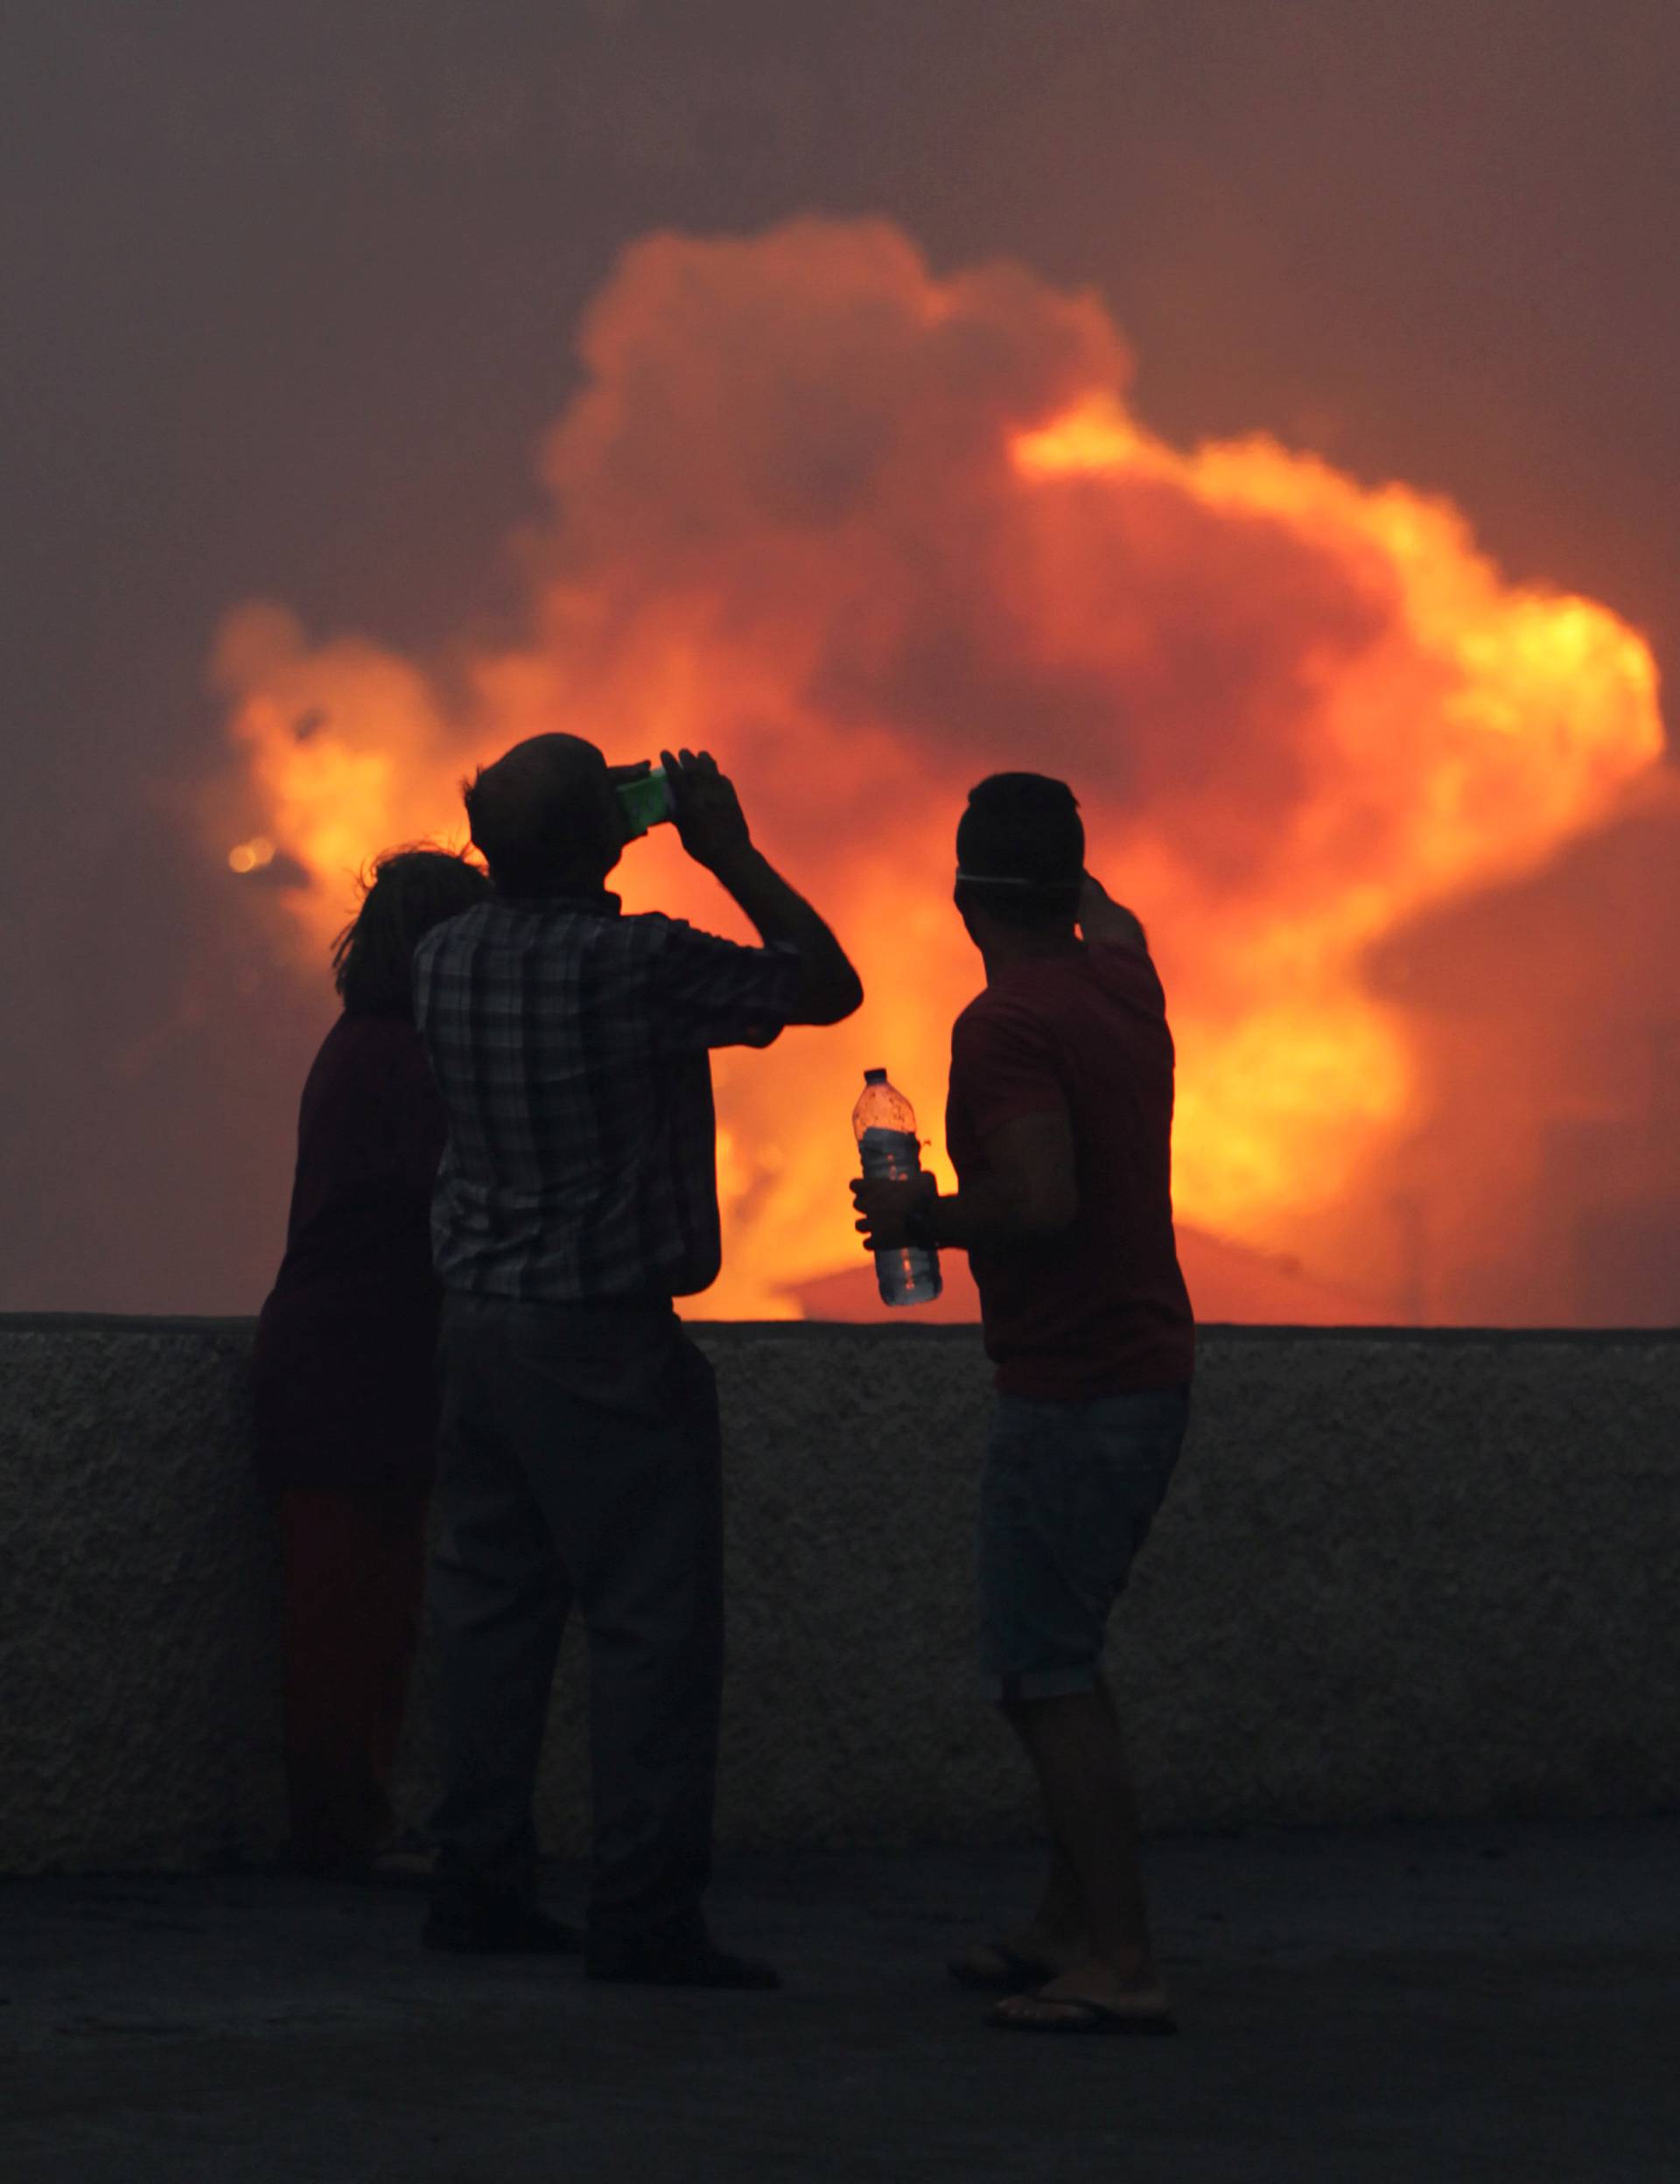 People watch the wildfires at Funchal, Madeira island, Portugal